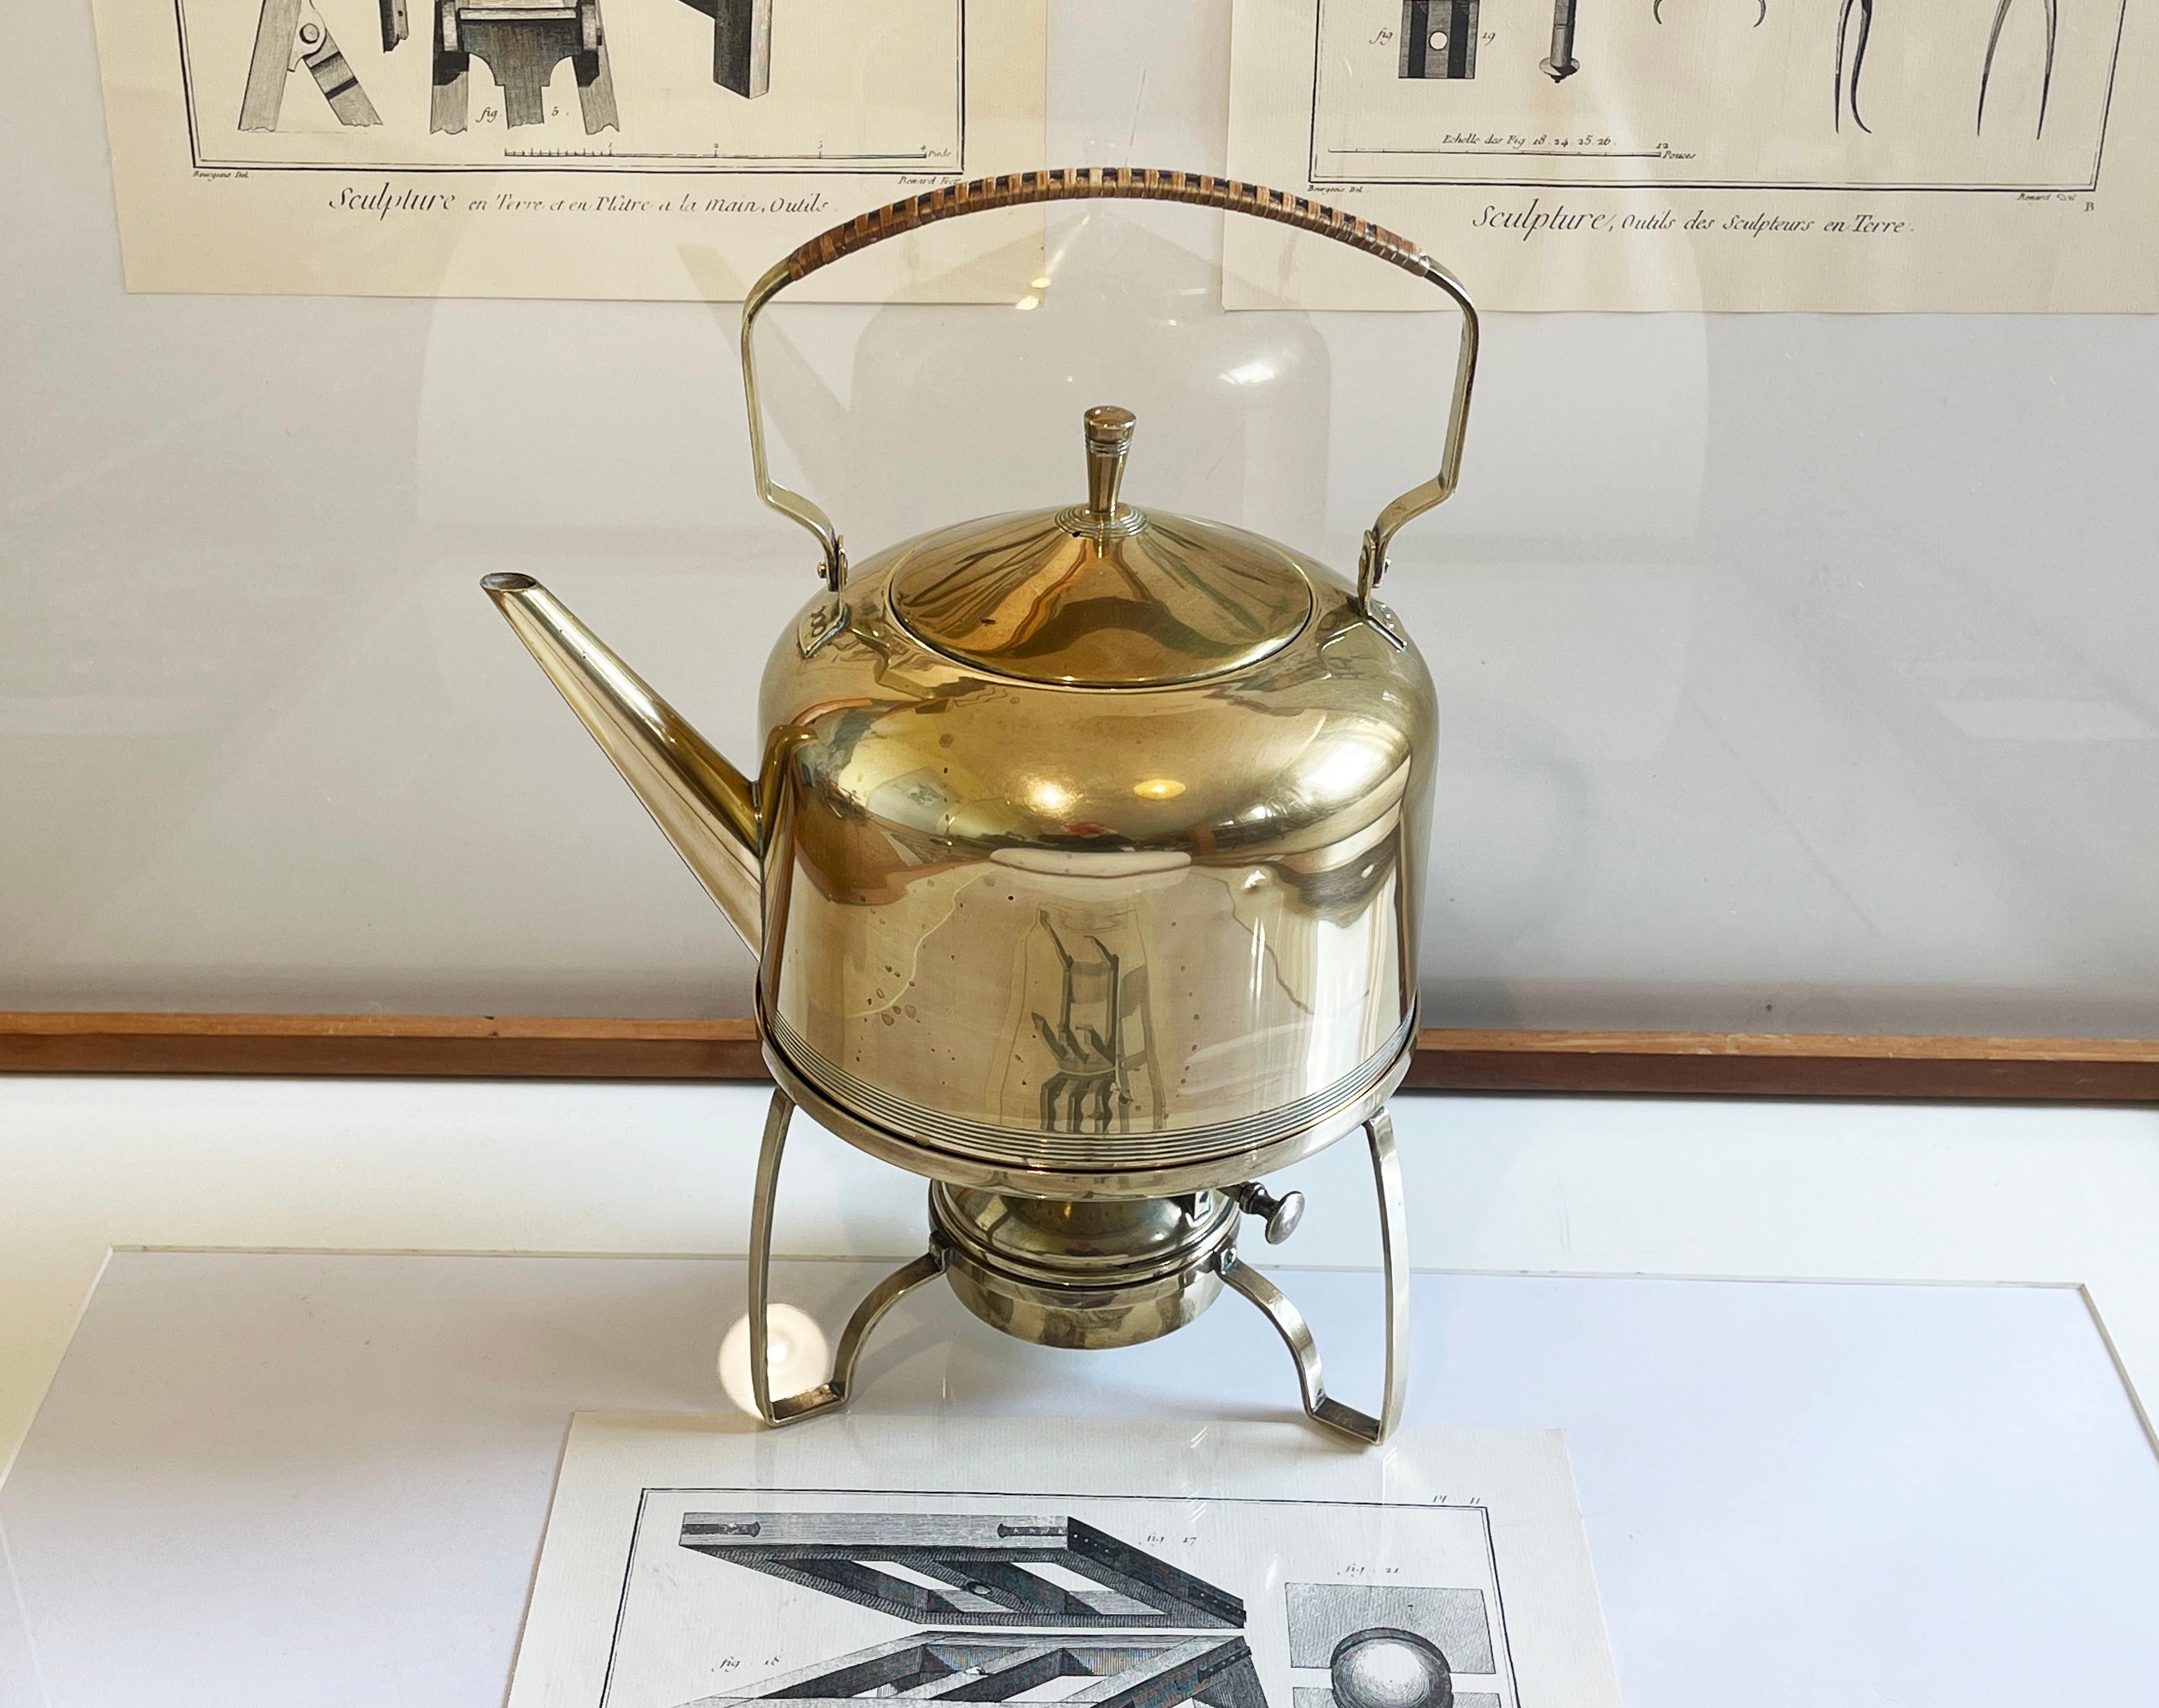 Wonderful antique brass teapot & warmer - i.e. teapot with stand and in original condition.
Completely preserved original from the 1910s to 1920s.
Wonderful craftsmanship & design by F. & R. Fischer, Goeppingen, Germany.

The jug holds 2 litres